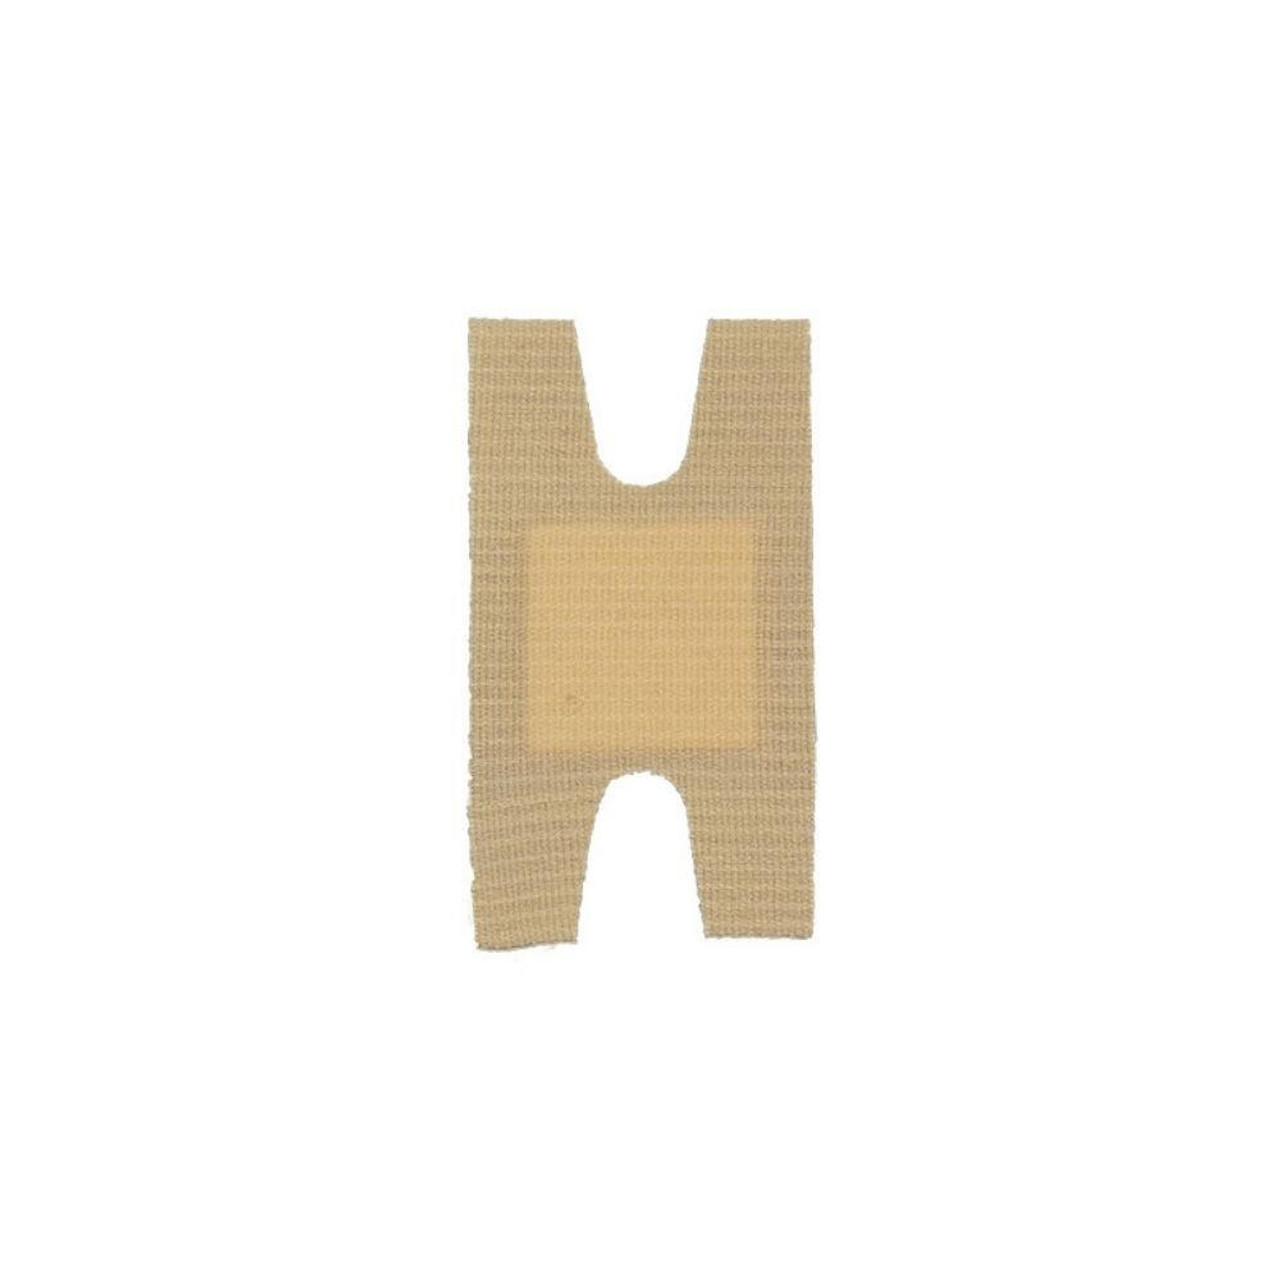 HypaPlast Fabric Plasters Knuckle Shape Box of 100 Hypoallergenic